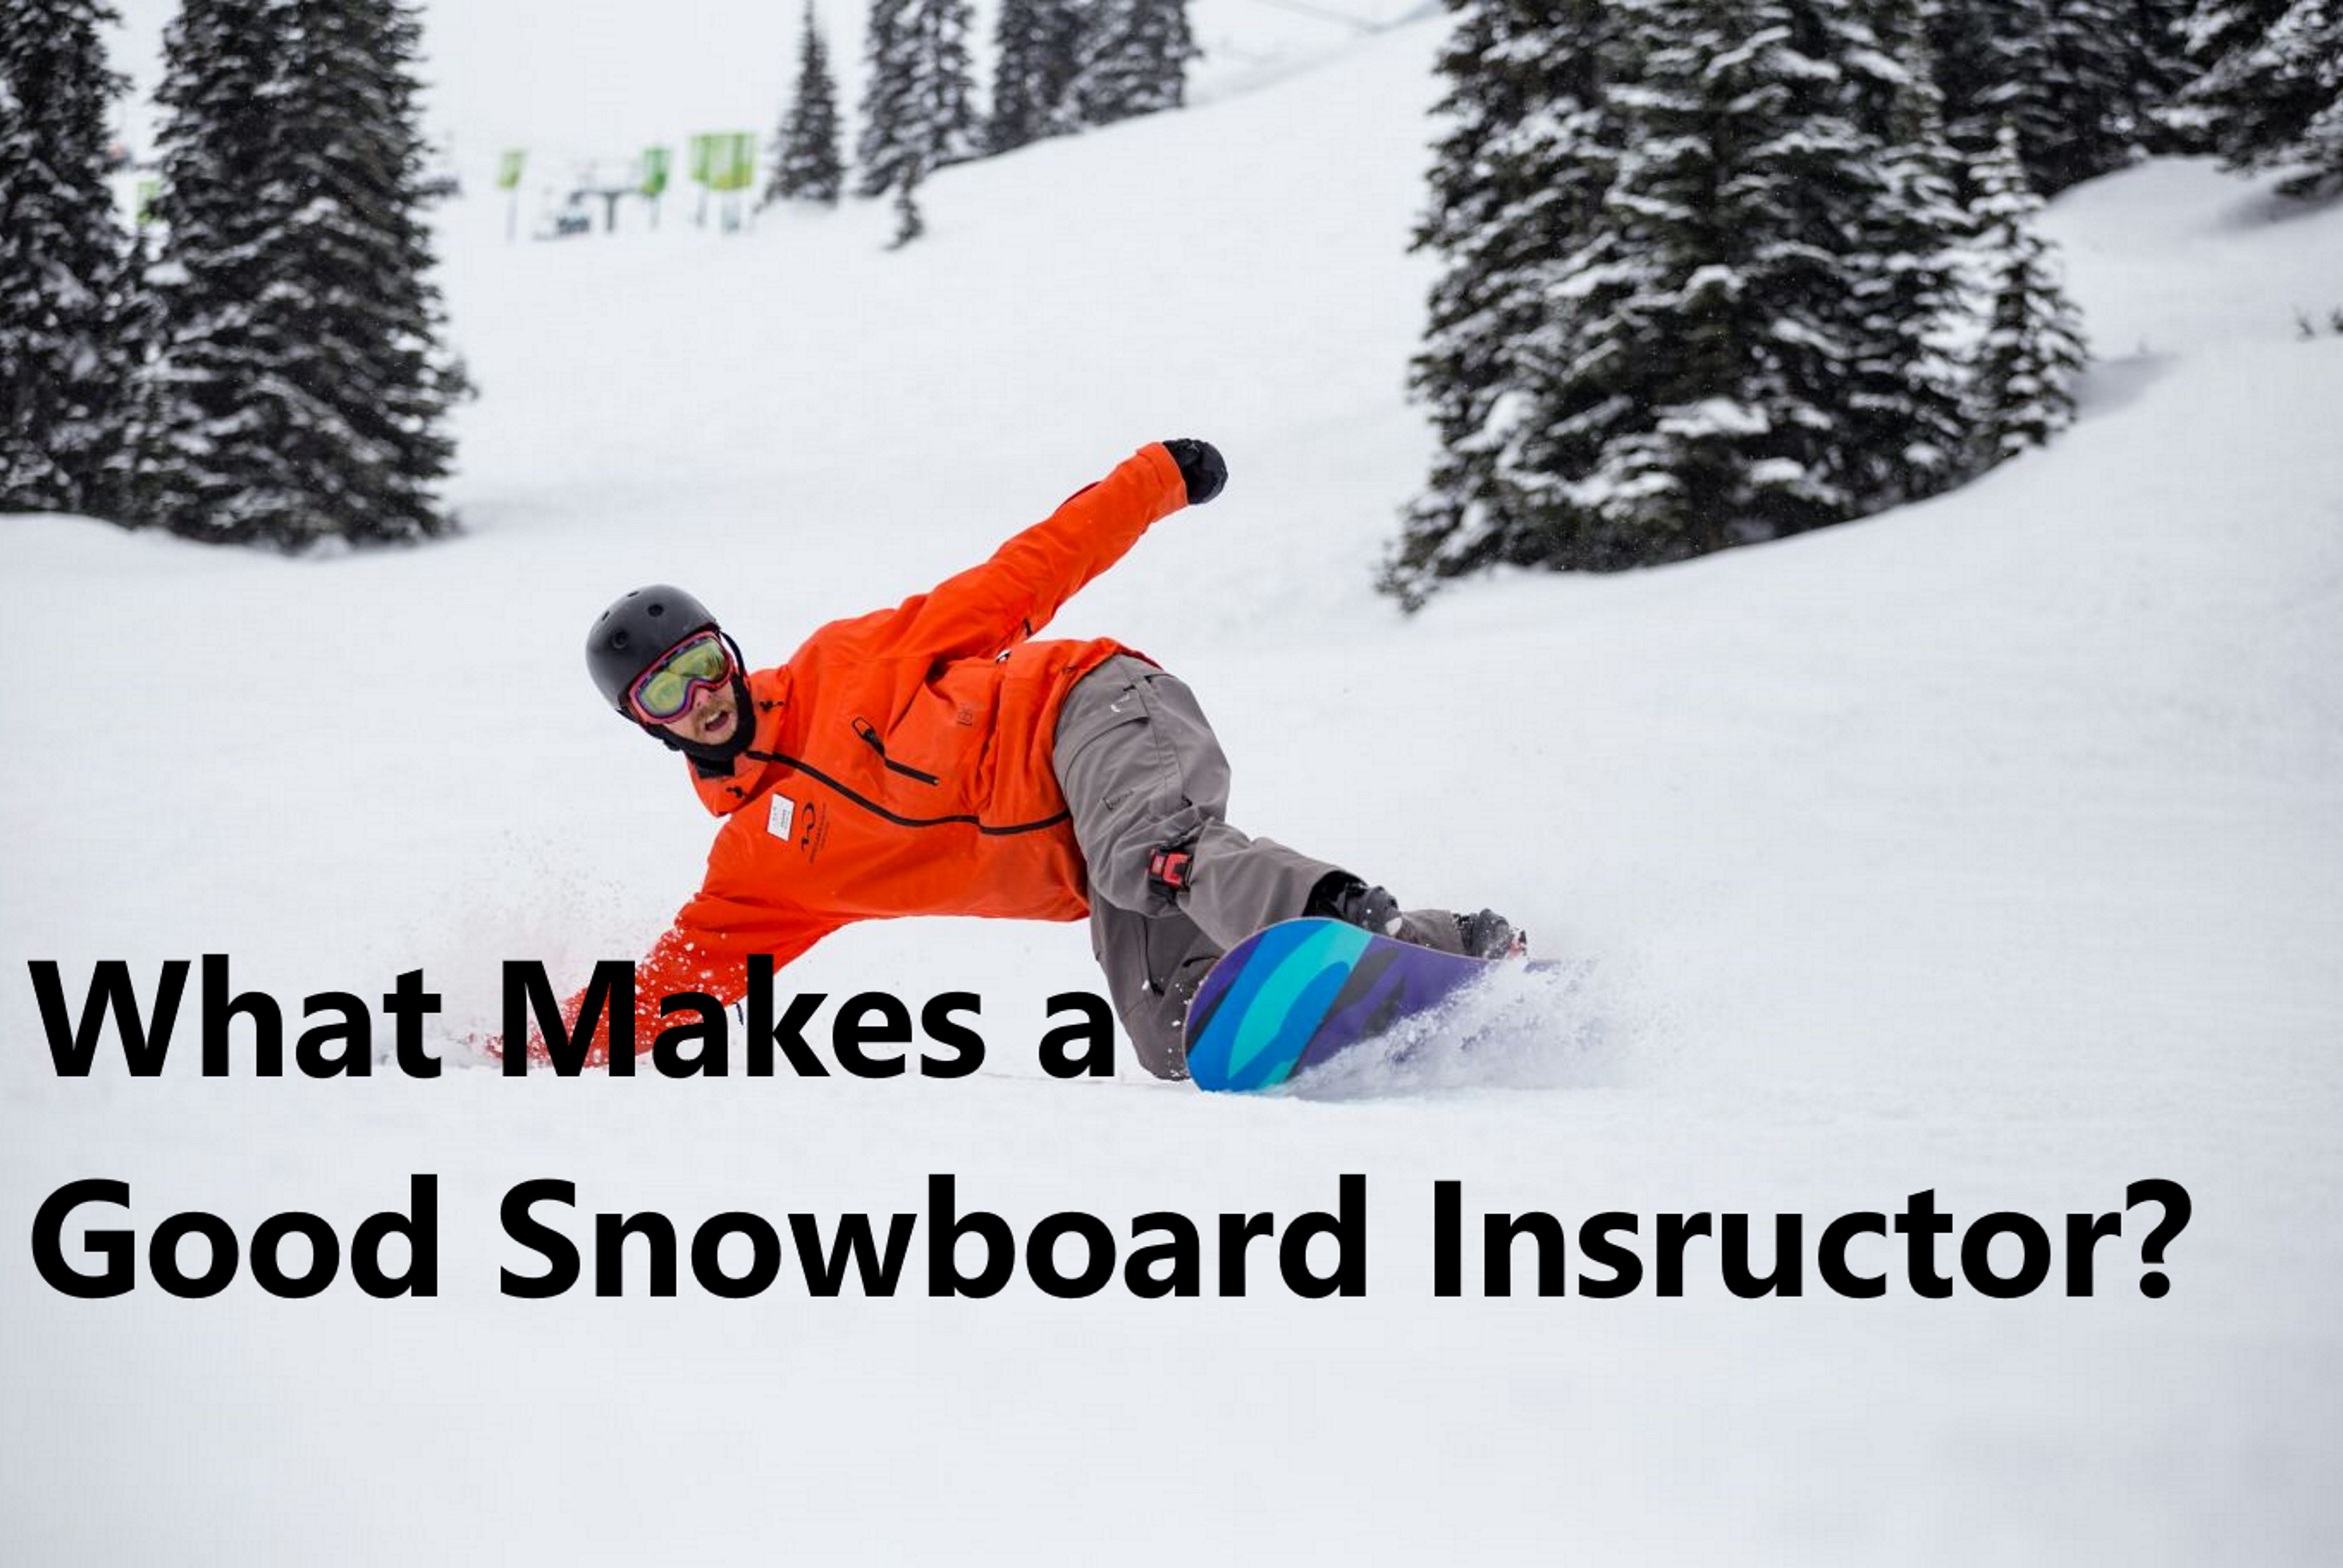 What Makes a Good Snowboard Instructor?